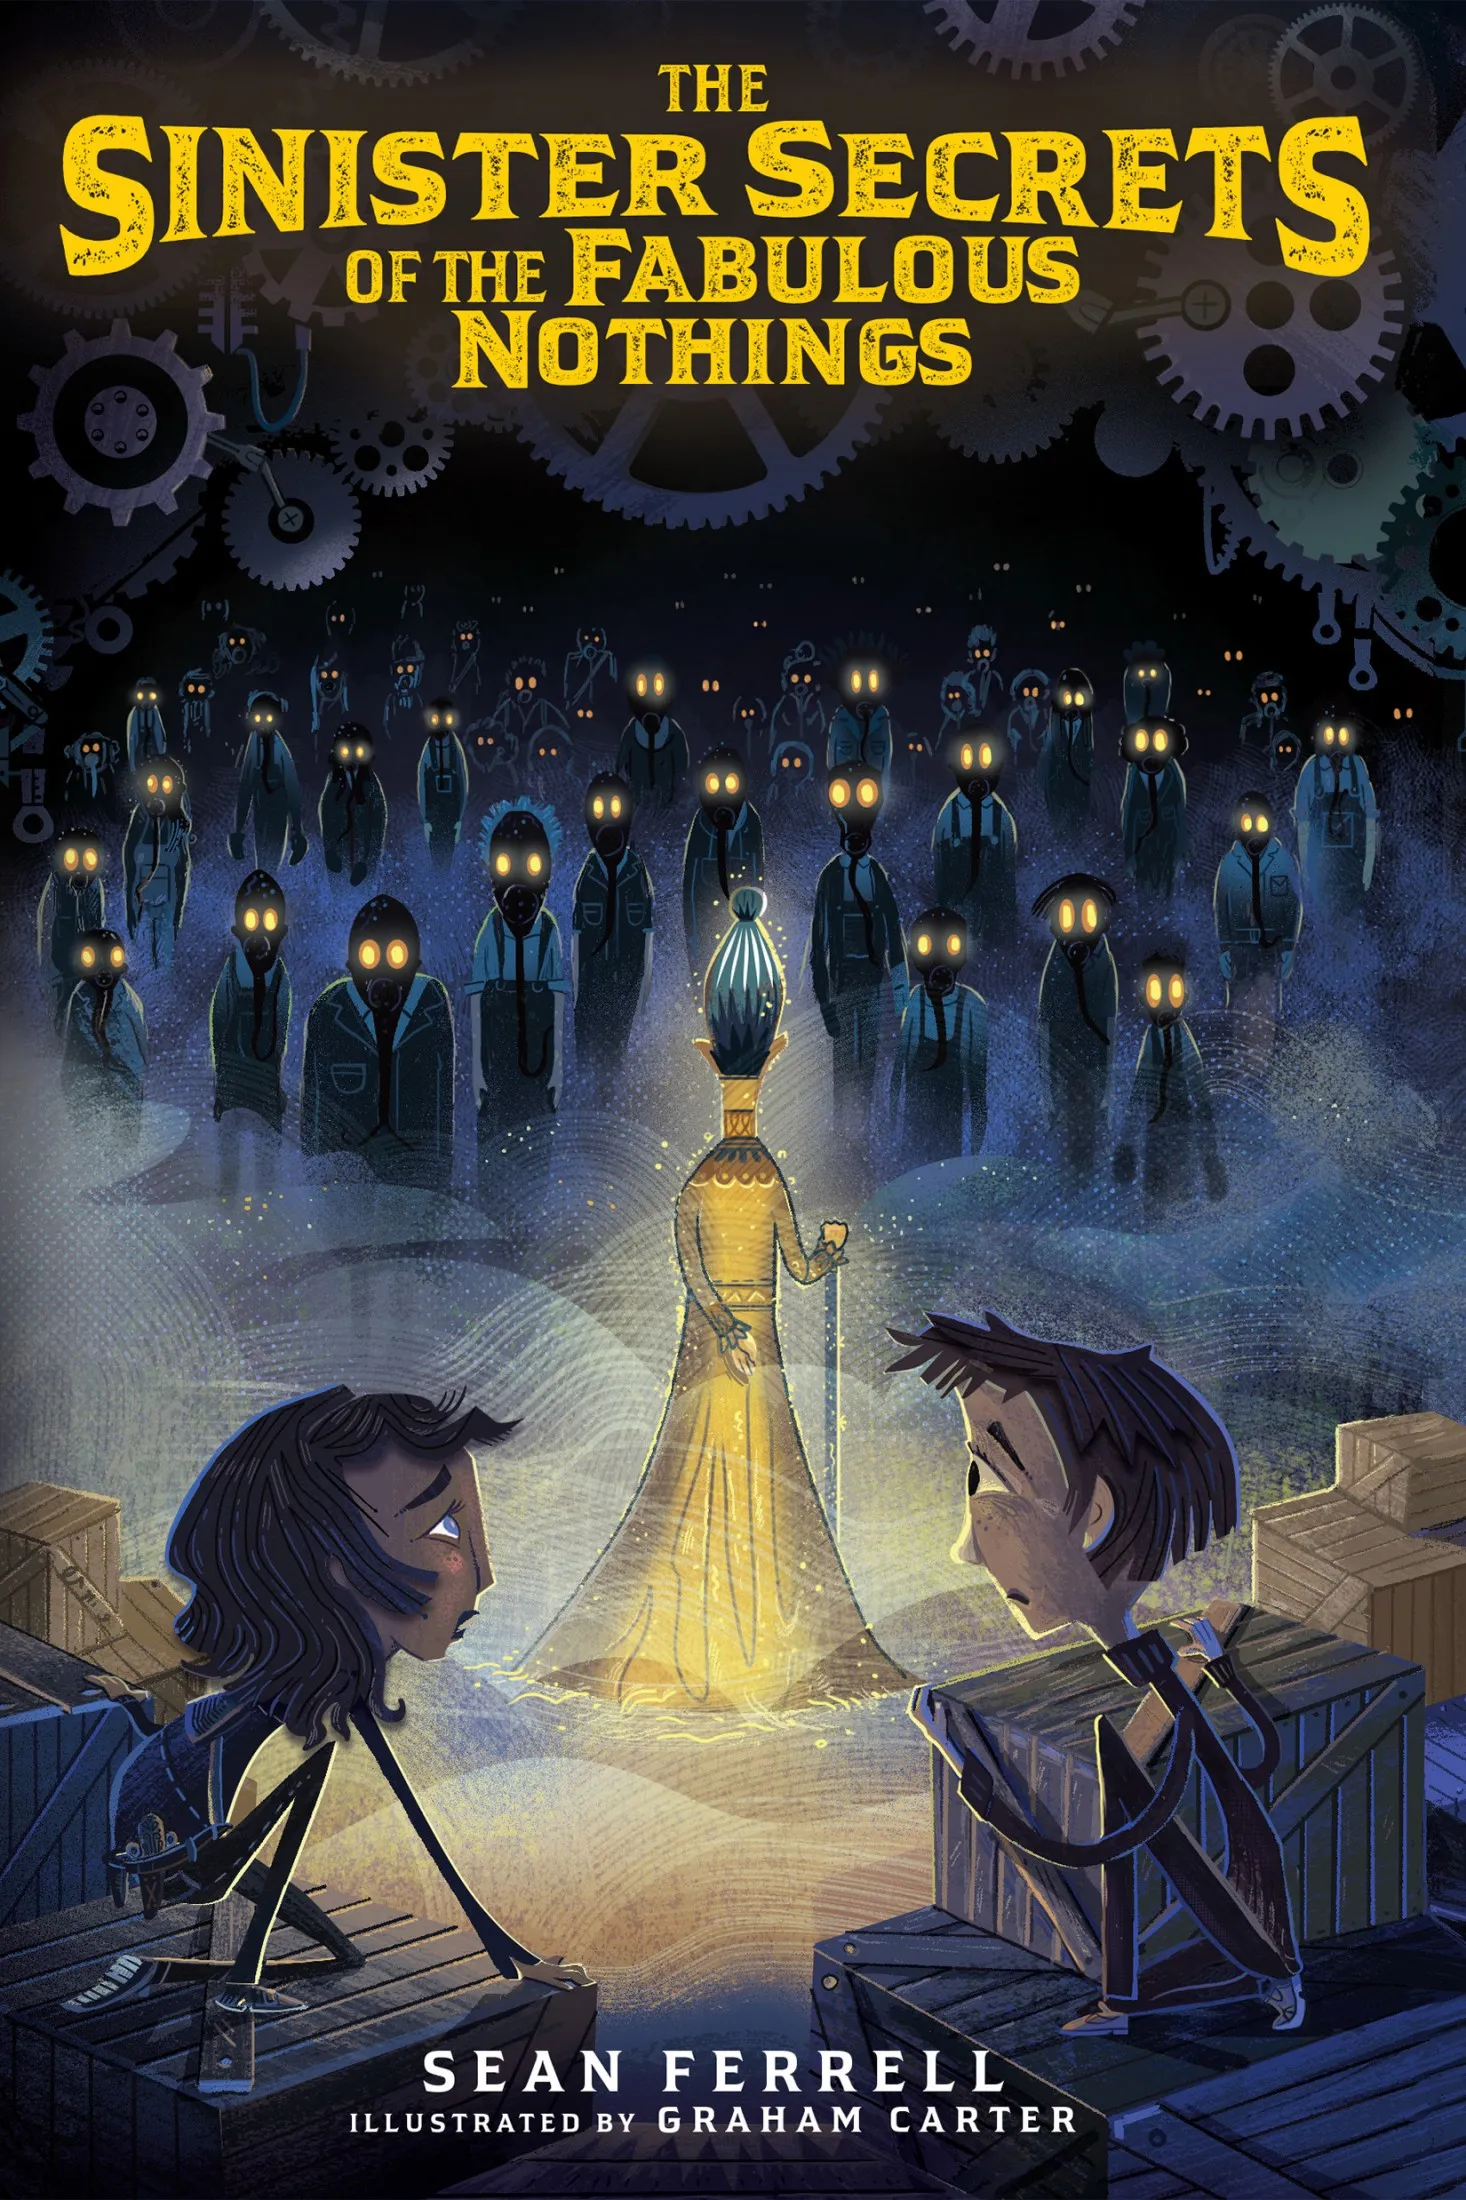 The Sinister Secrets of the Fabulous Nothings (The Sinister Secrets #2)